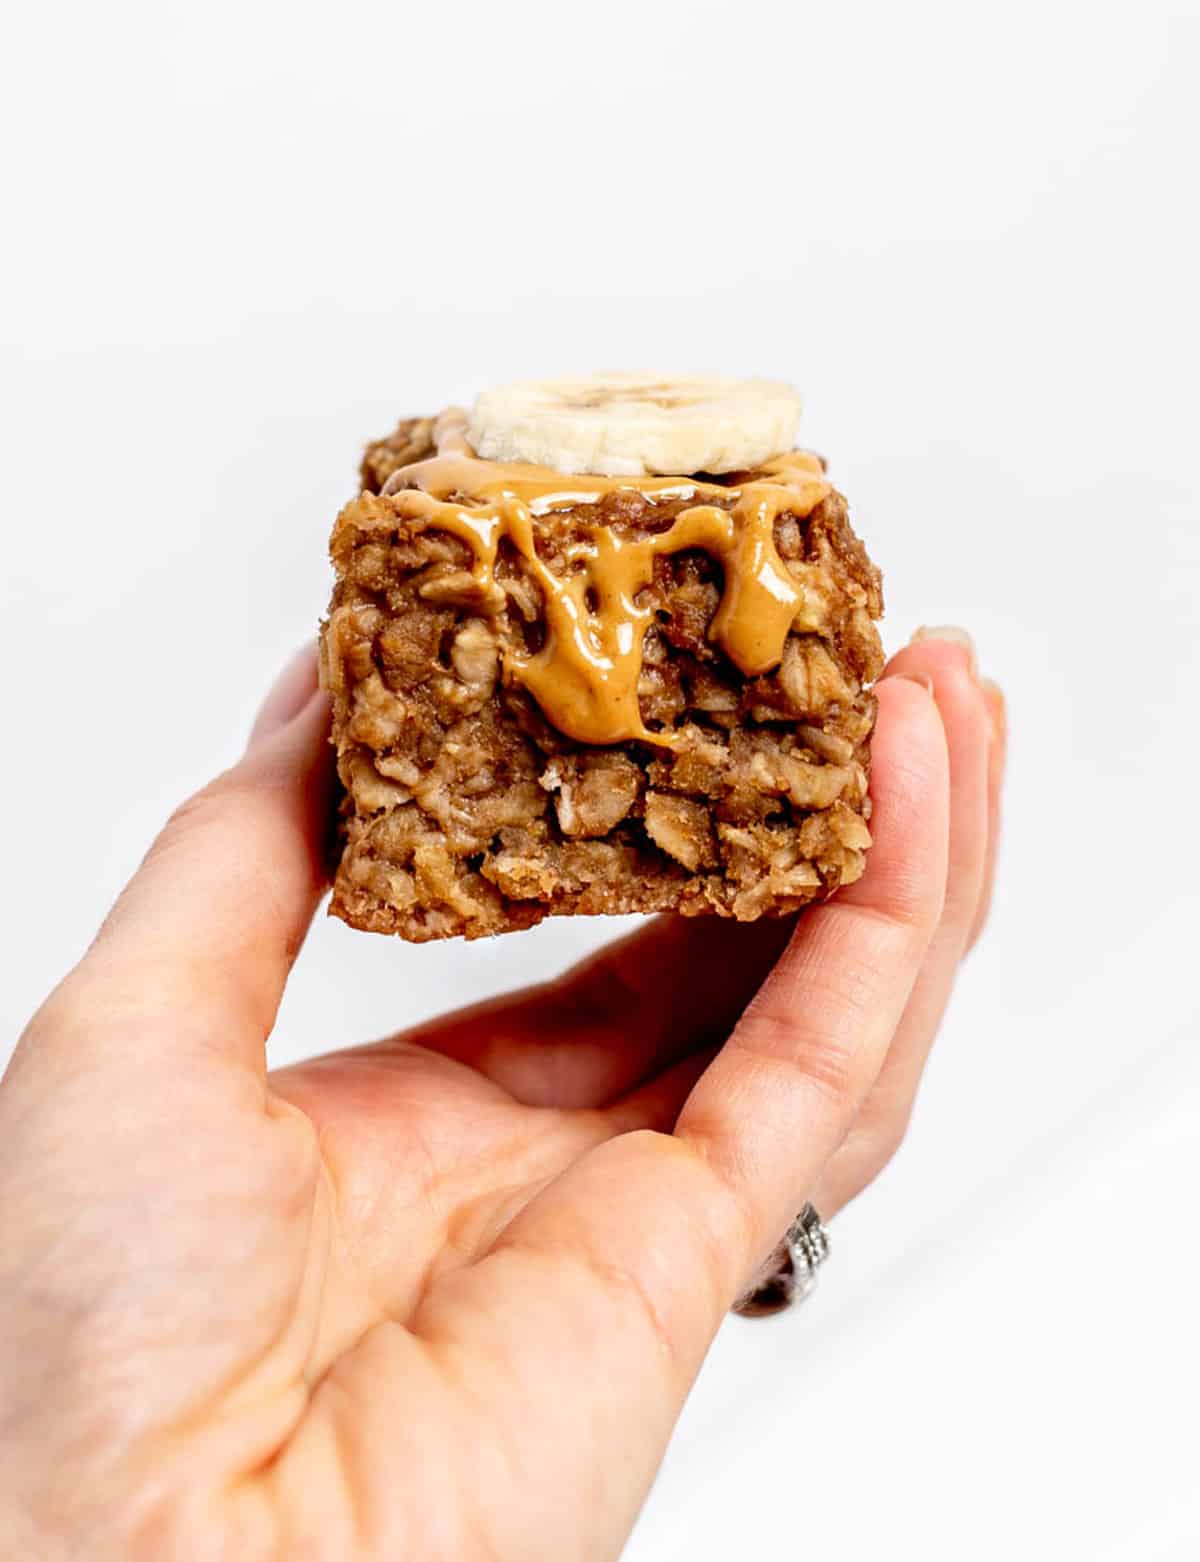 A hand holding up a 3 ingredient banana oatmeal bar.